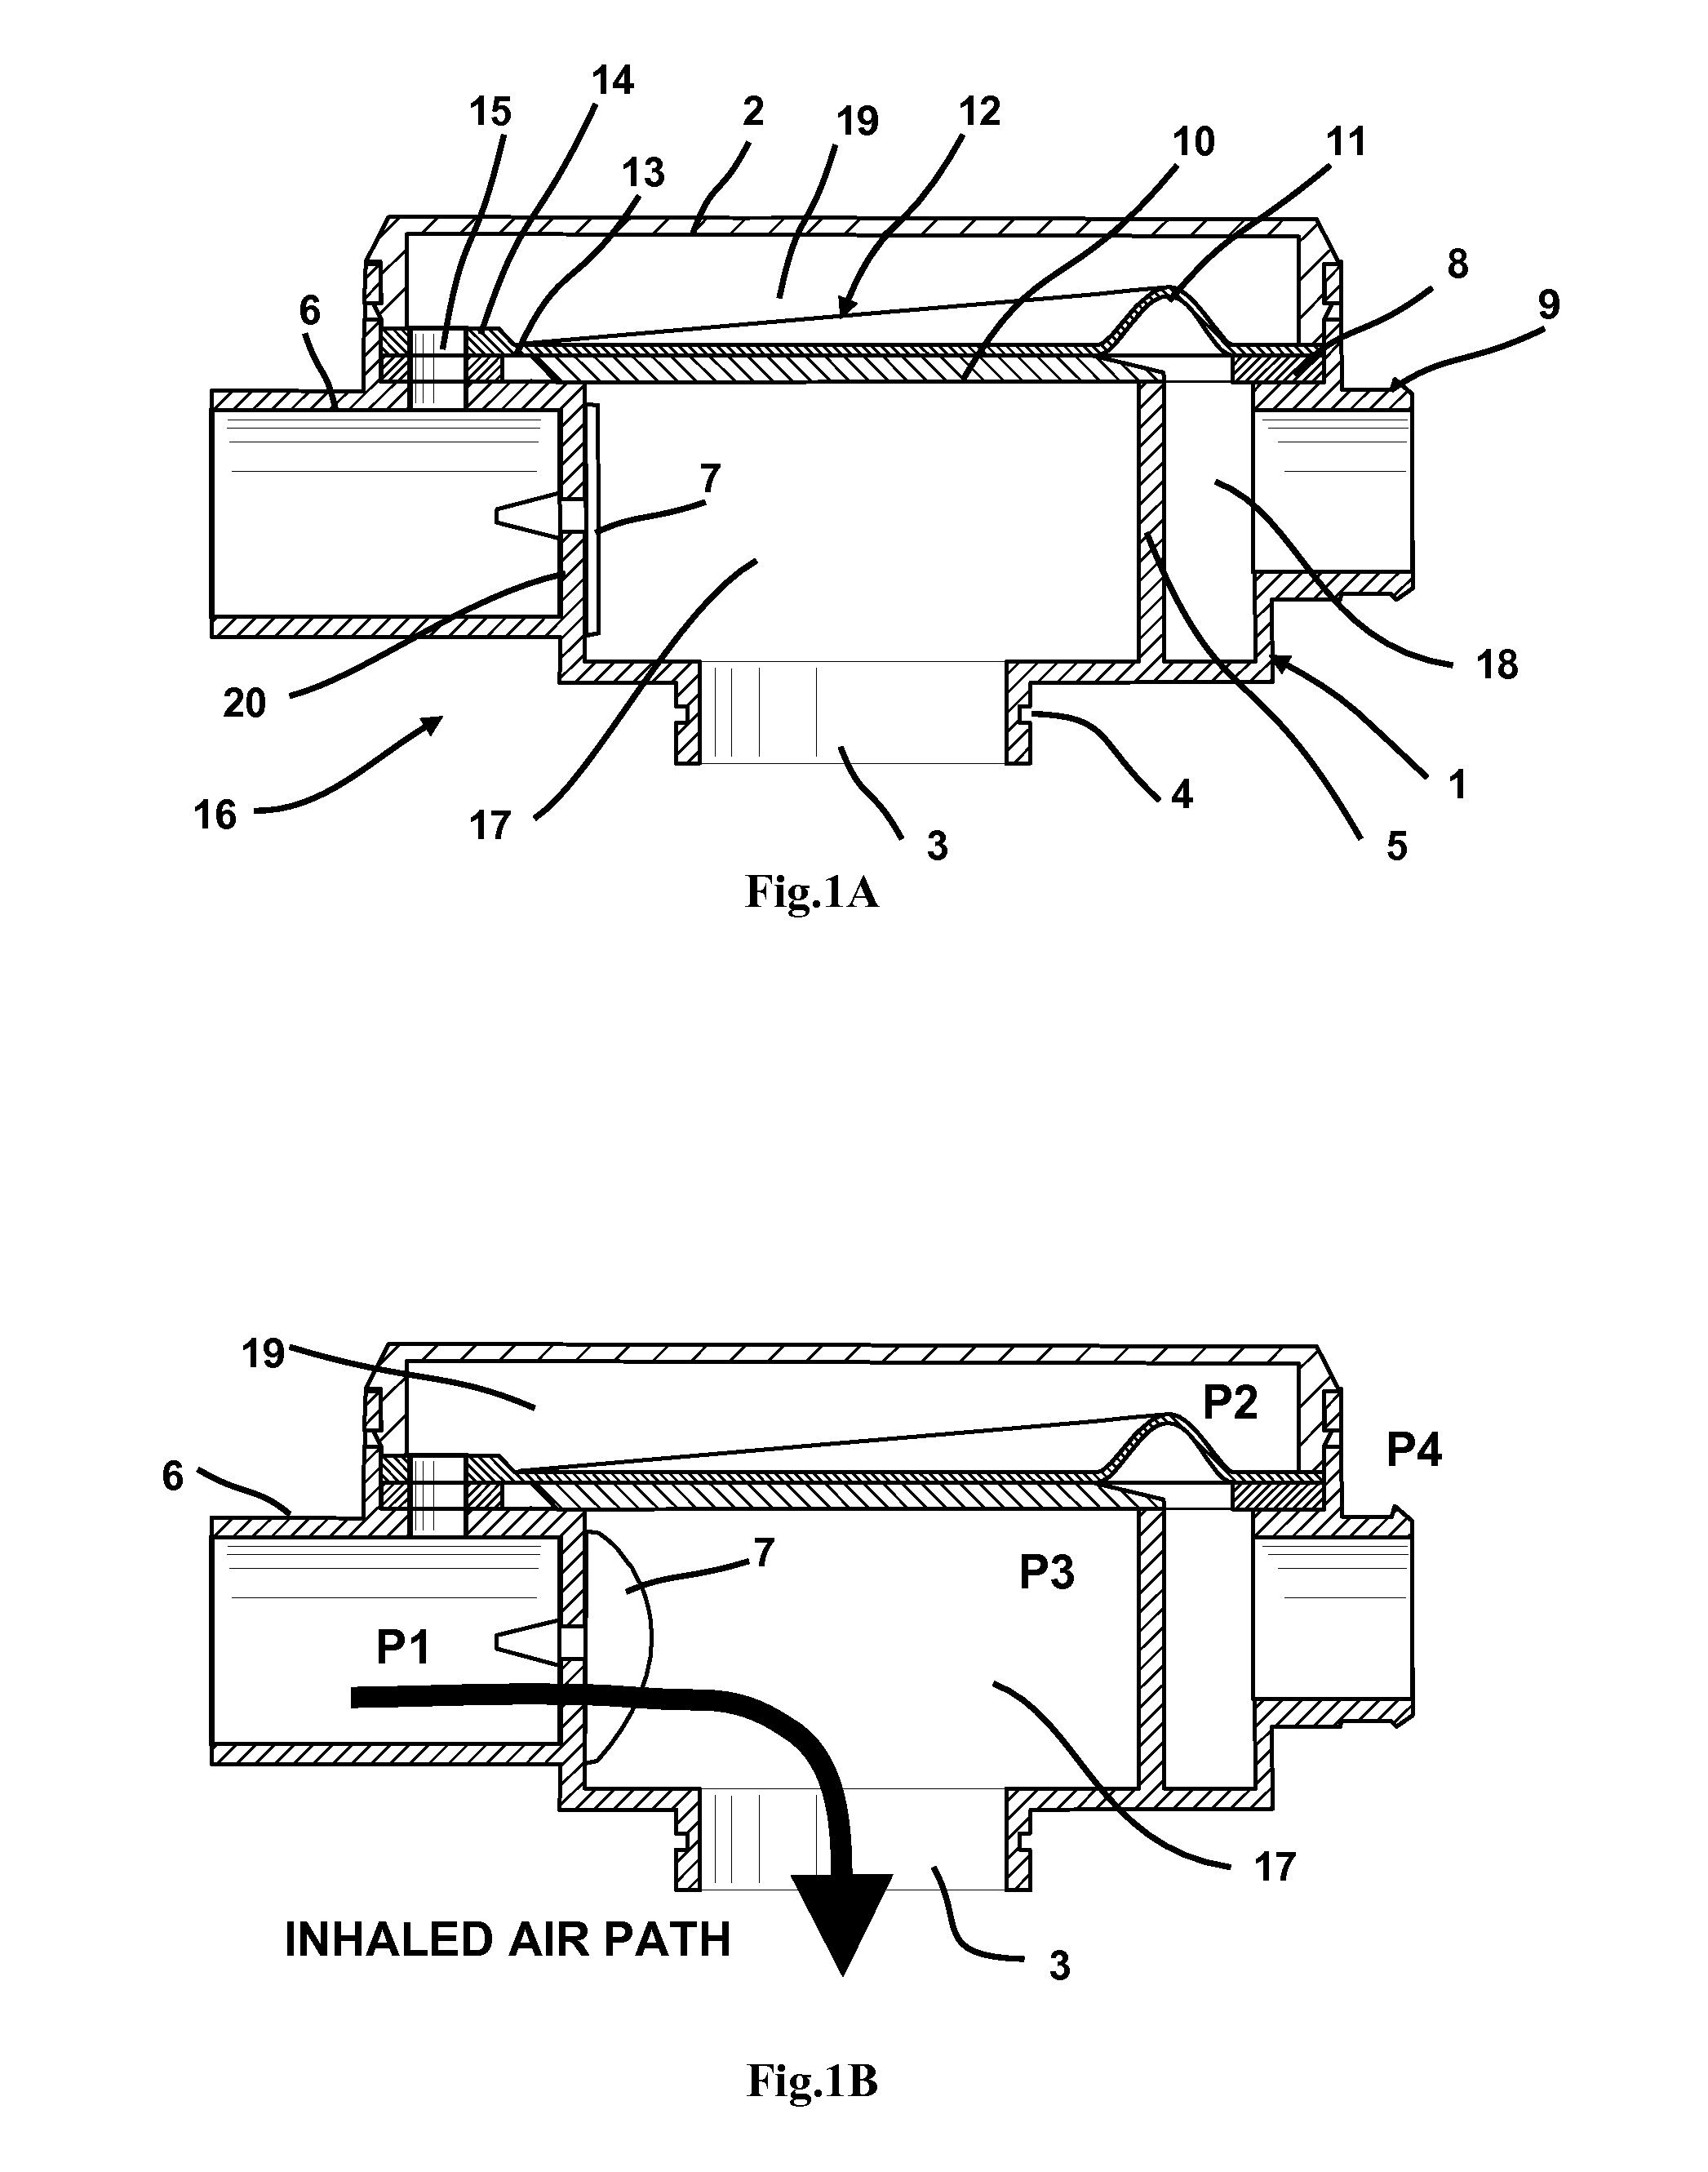 Exhaust Apparatus For Use in Administering Positive Pressure Therapy Through the Nose or Mouth